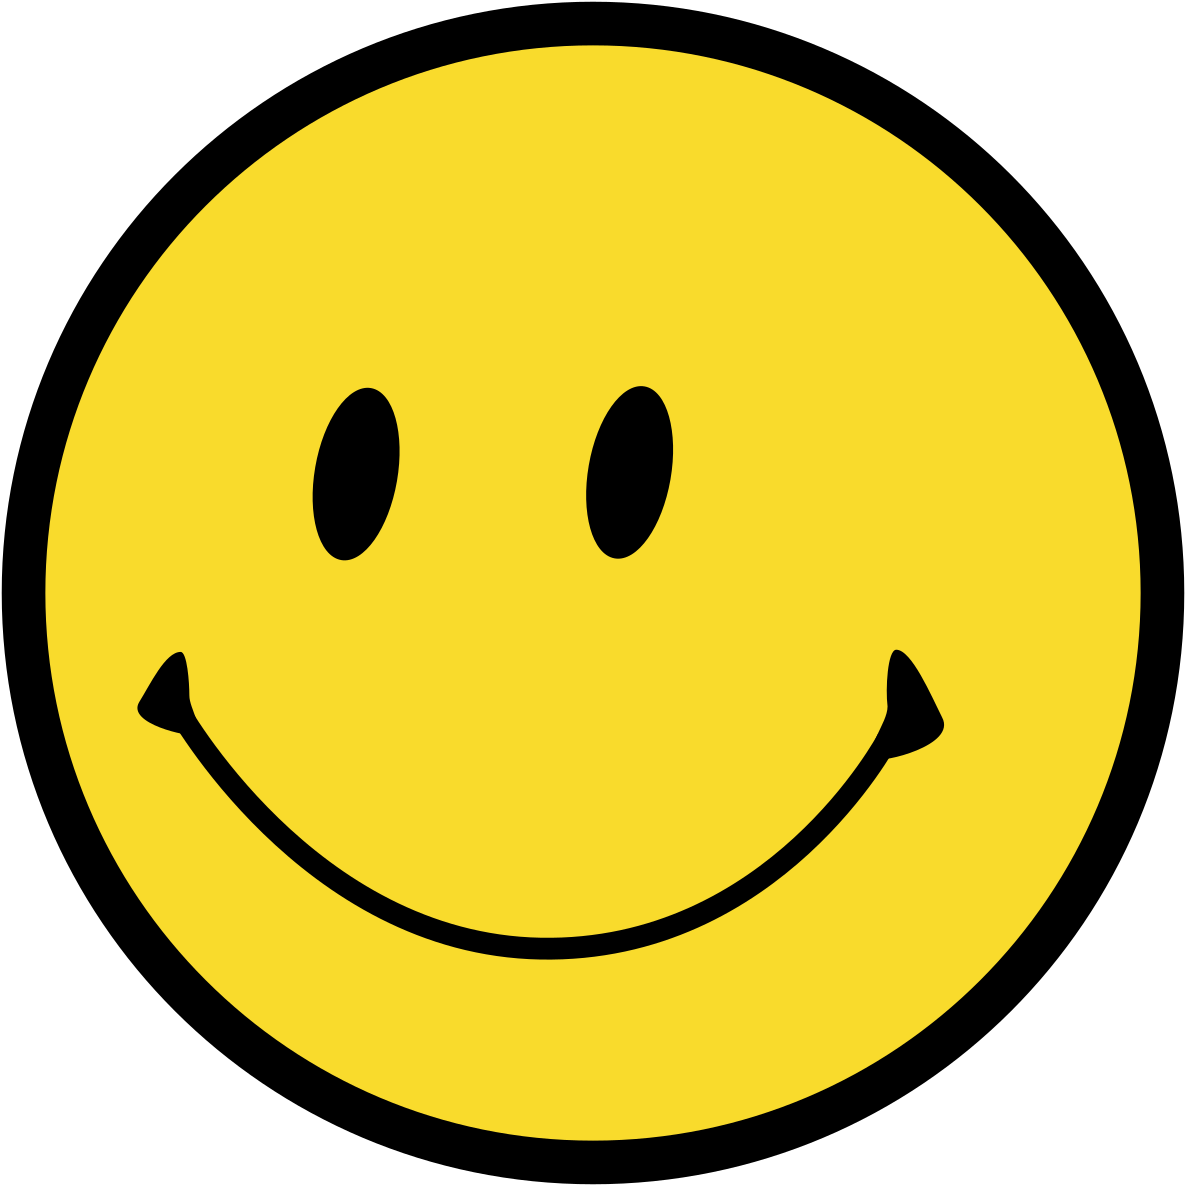 Clipart Smartness Design Images Of Smiley Faces Wikipedia - Awesome Face (1920x1920)